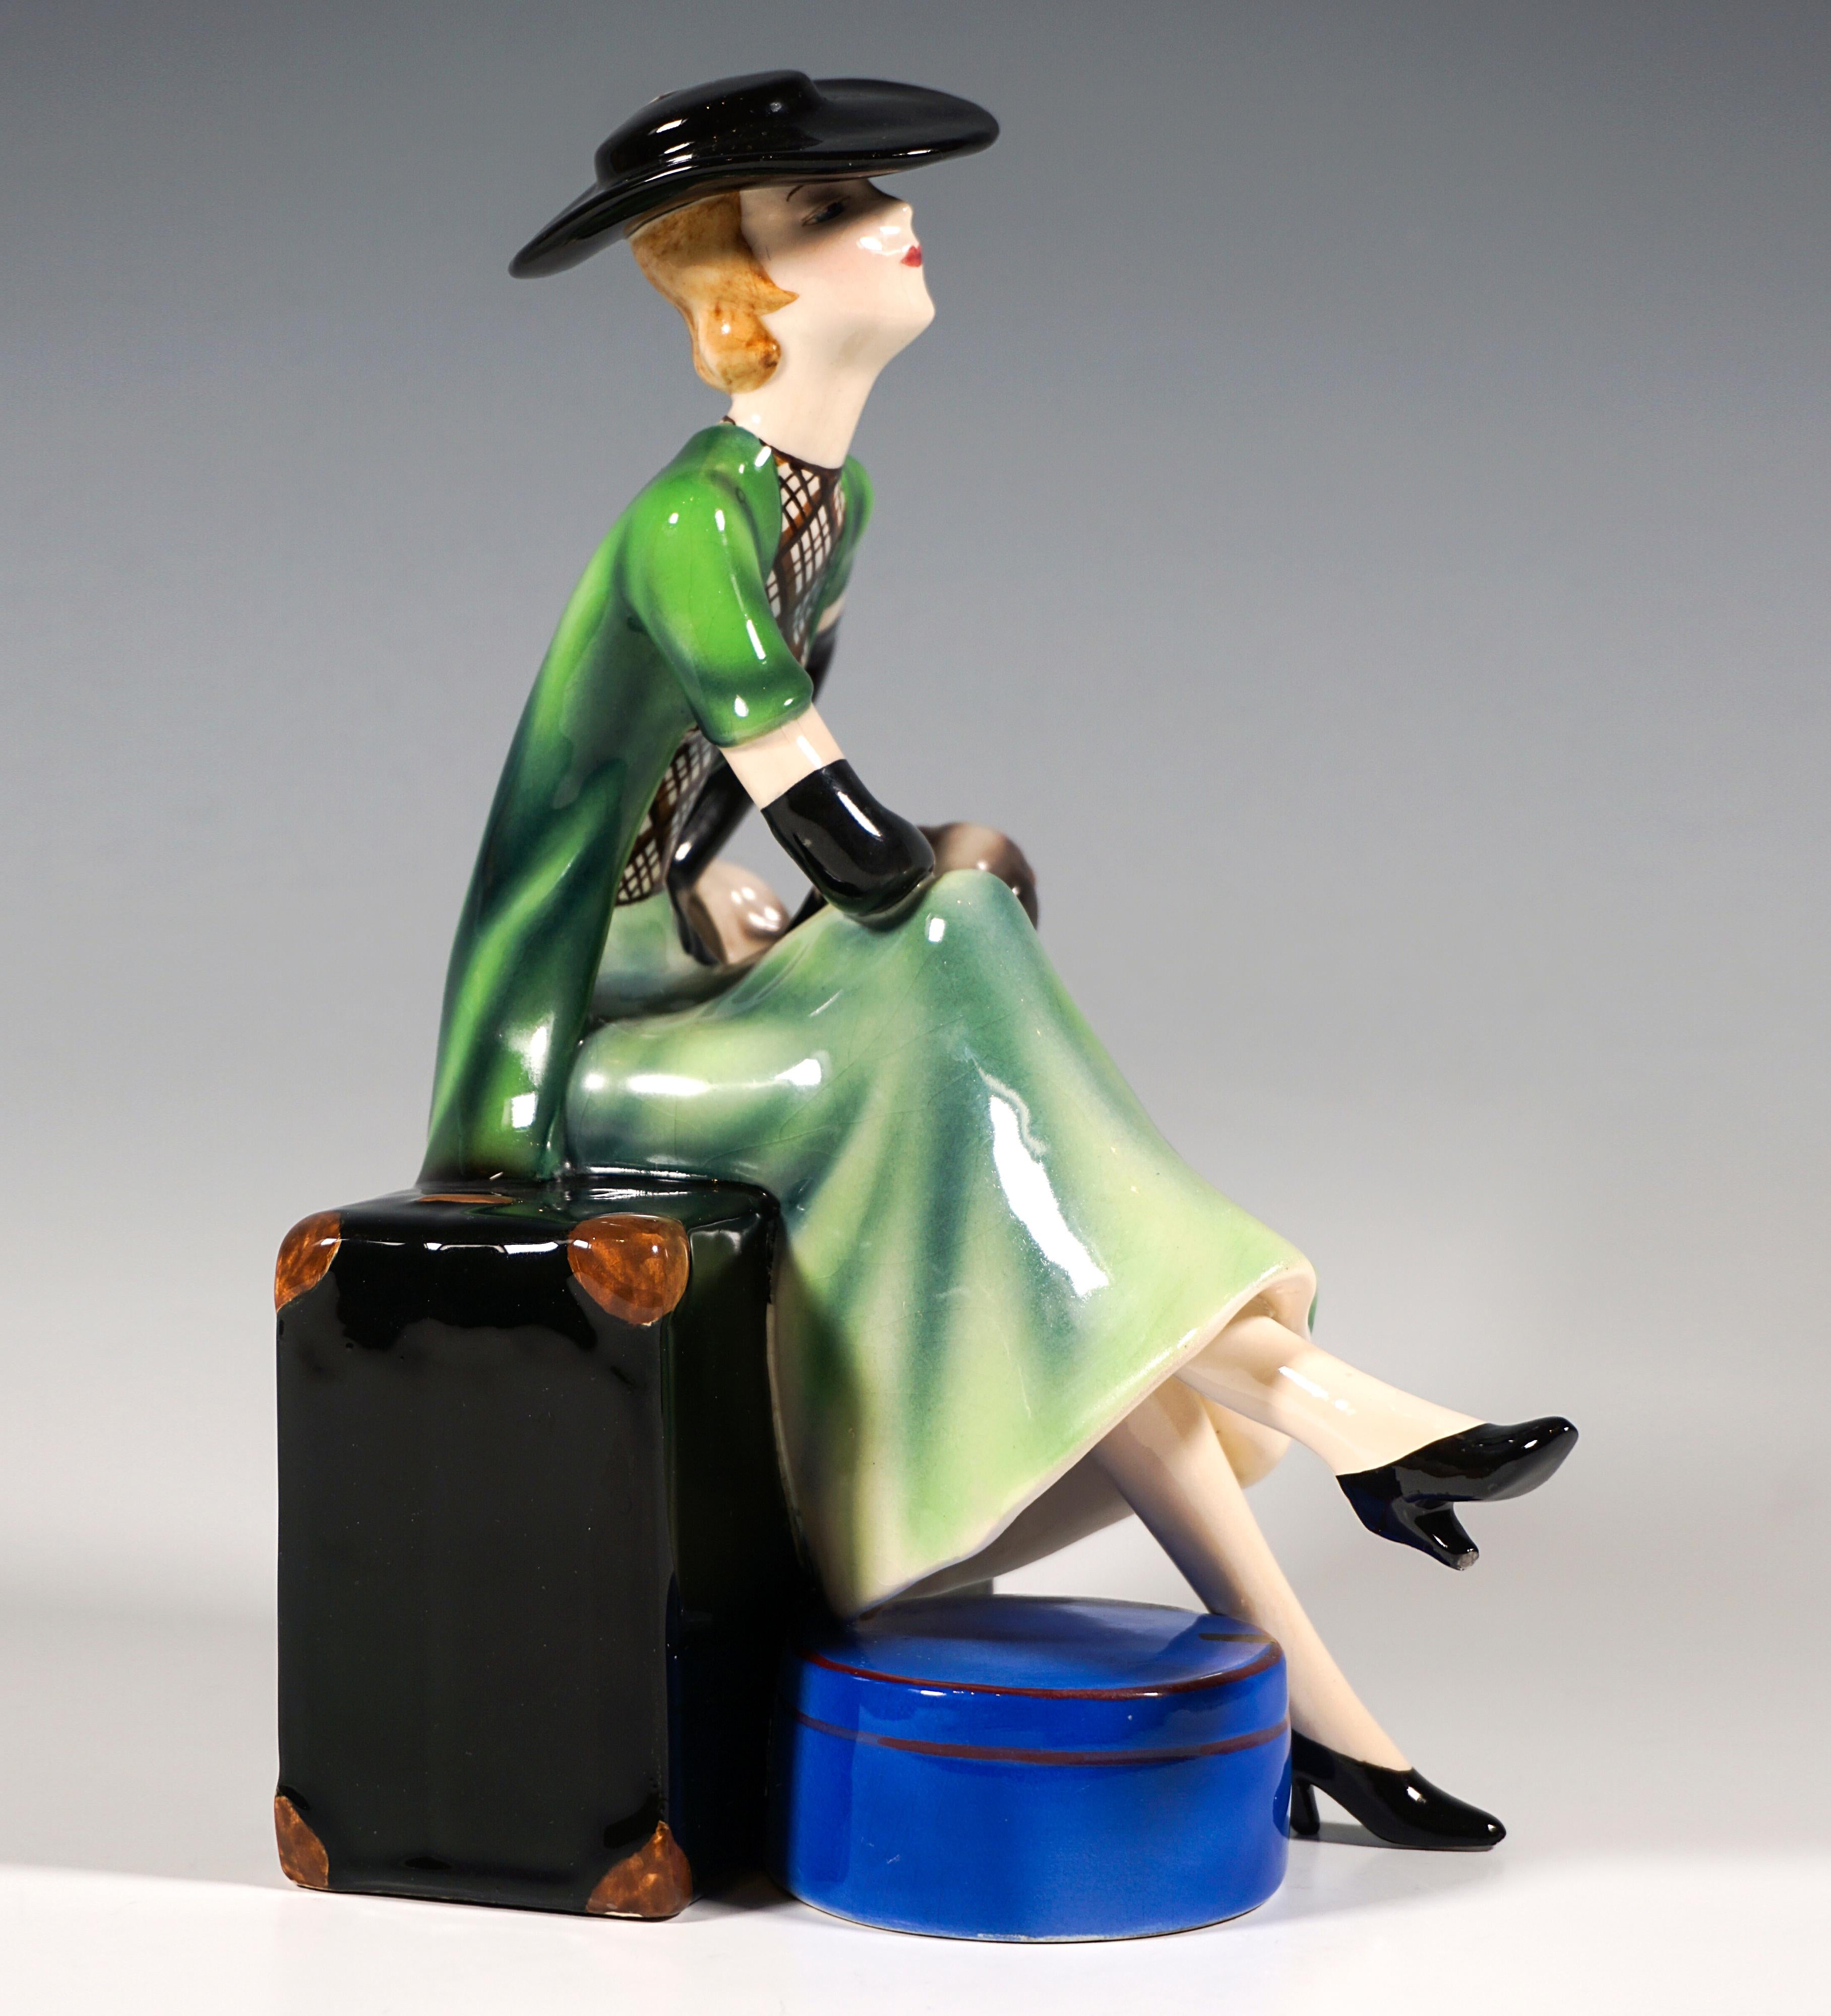 Rare and delicate Goldscheider Art Déco ceramic figurine of the 1930s:
Elegant young lady with chin-length blond curls and elegant black hat, green long skirt and white and black checkered blouse, wearing a short-sleeved green vest and long black